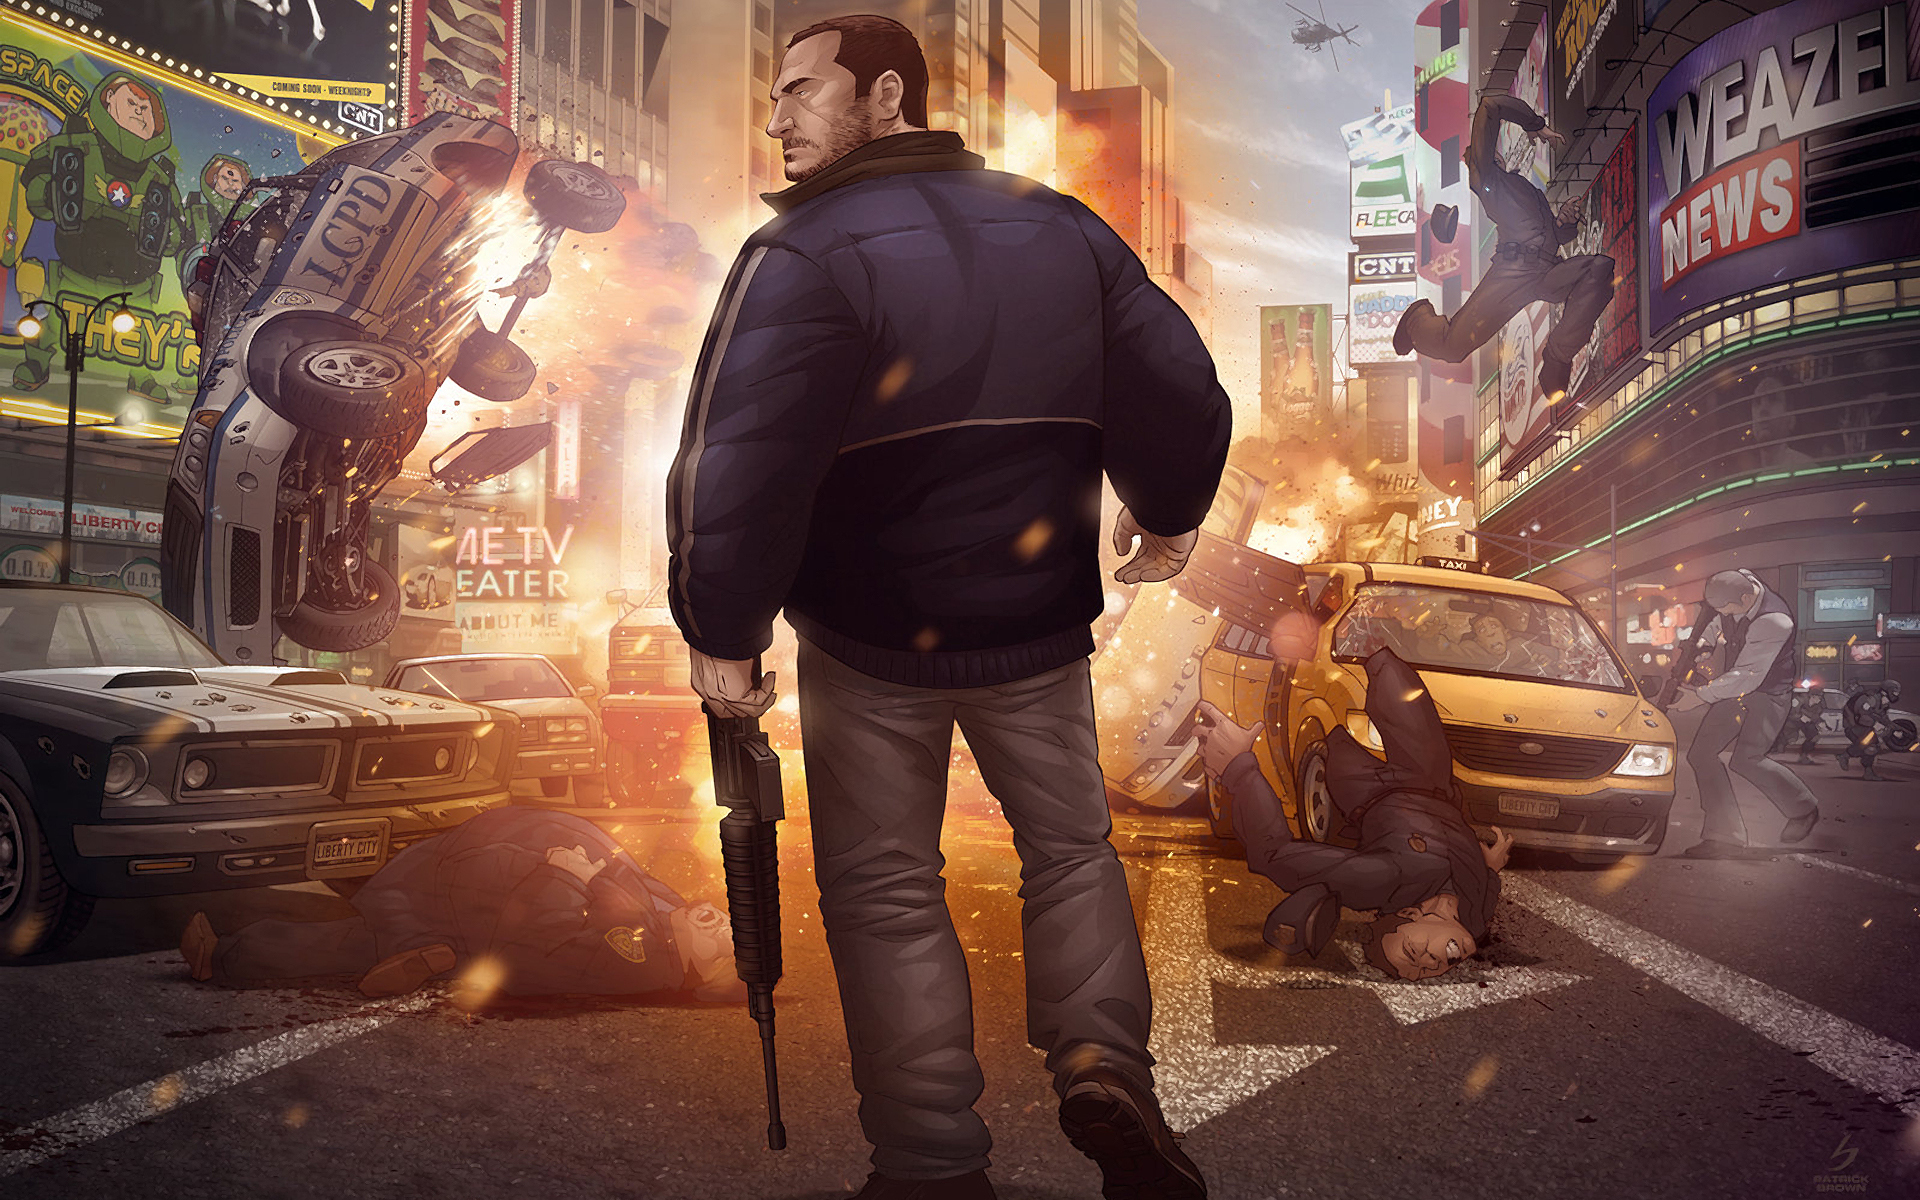 Grand Theft Auto IV Wallpapers